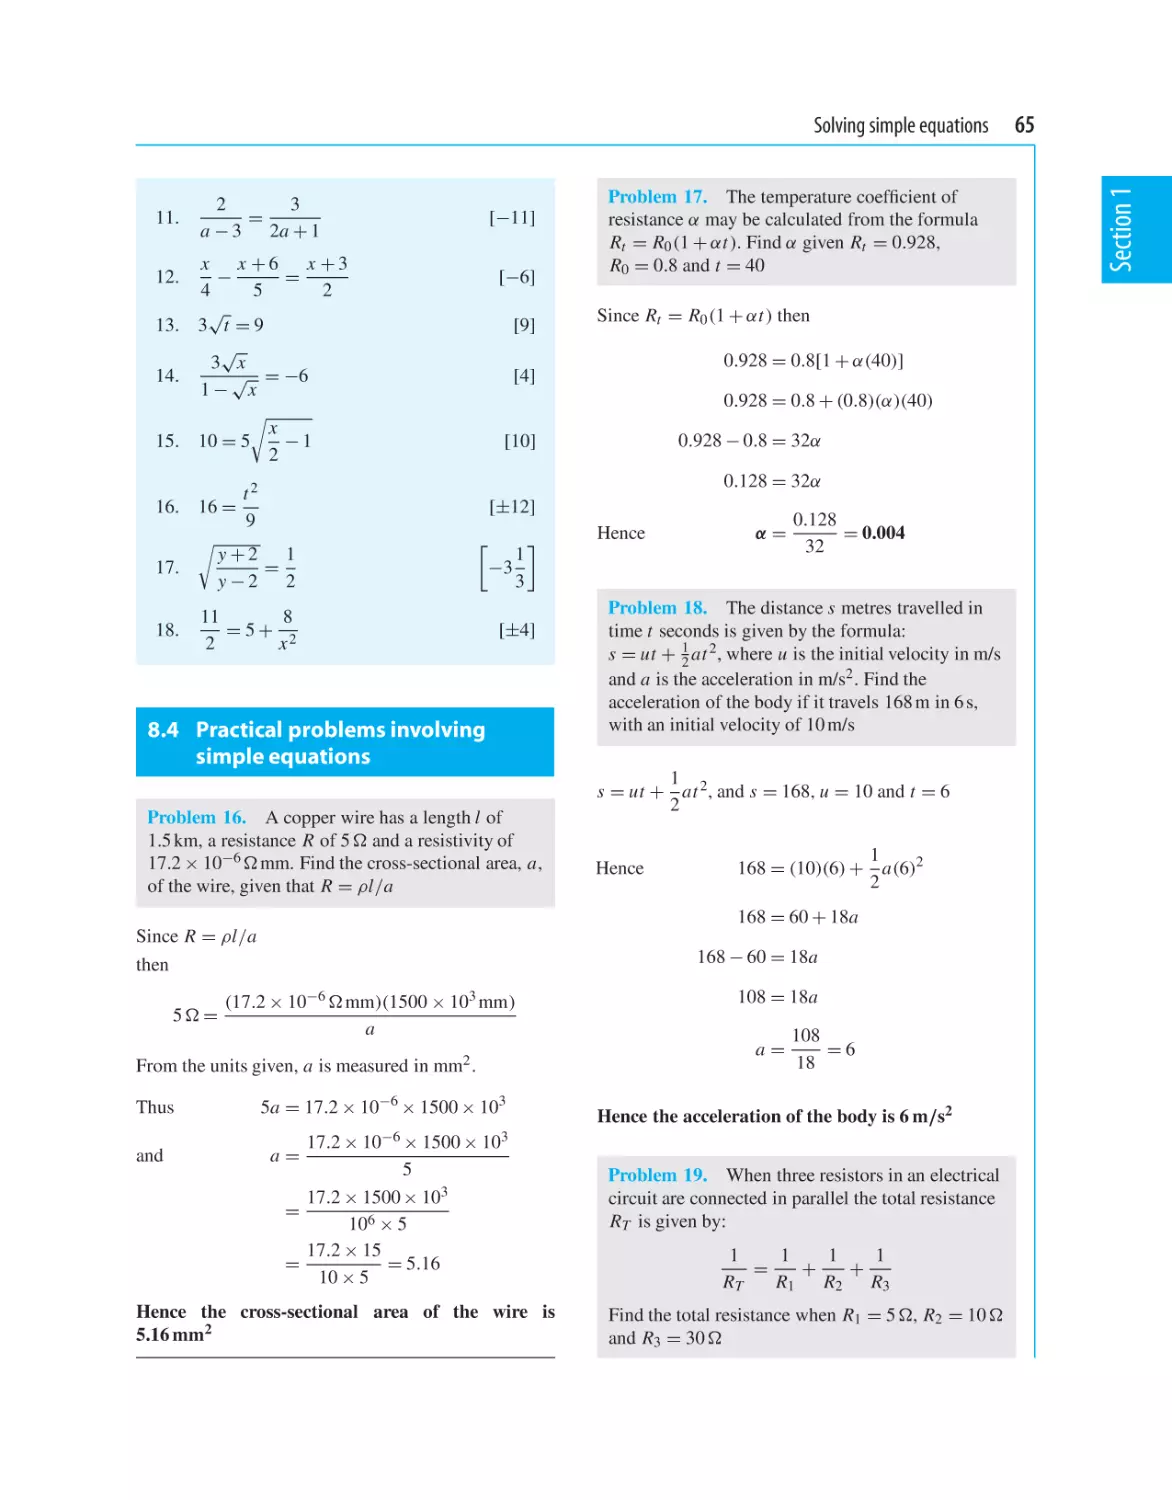 8.4 Practical problems involving simple equations